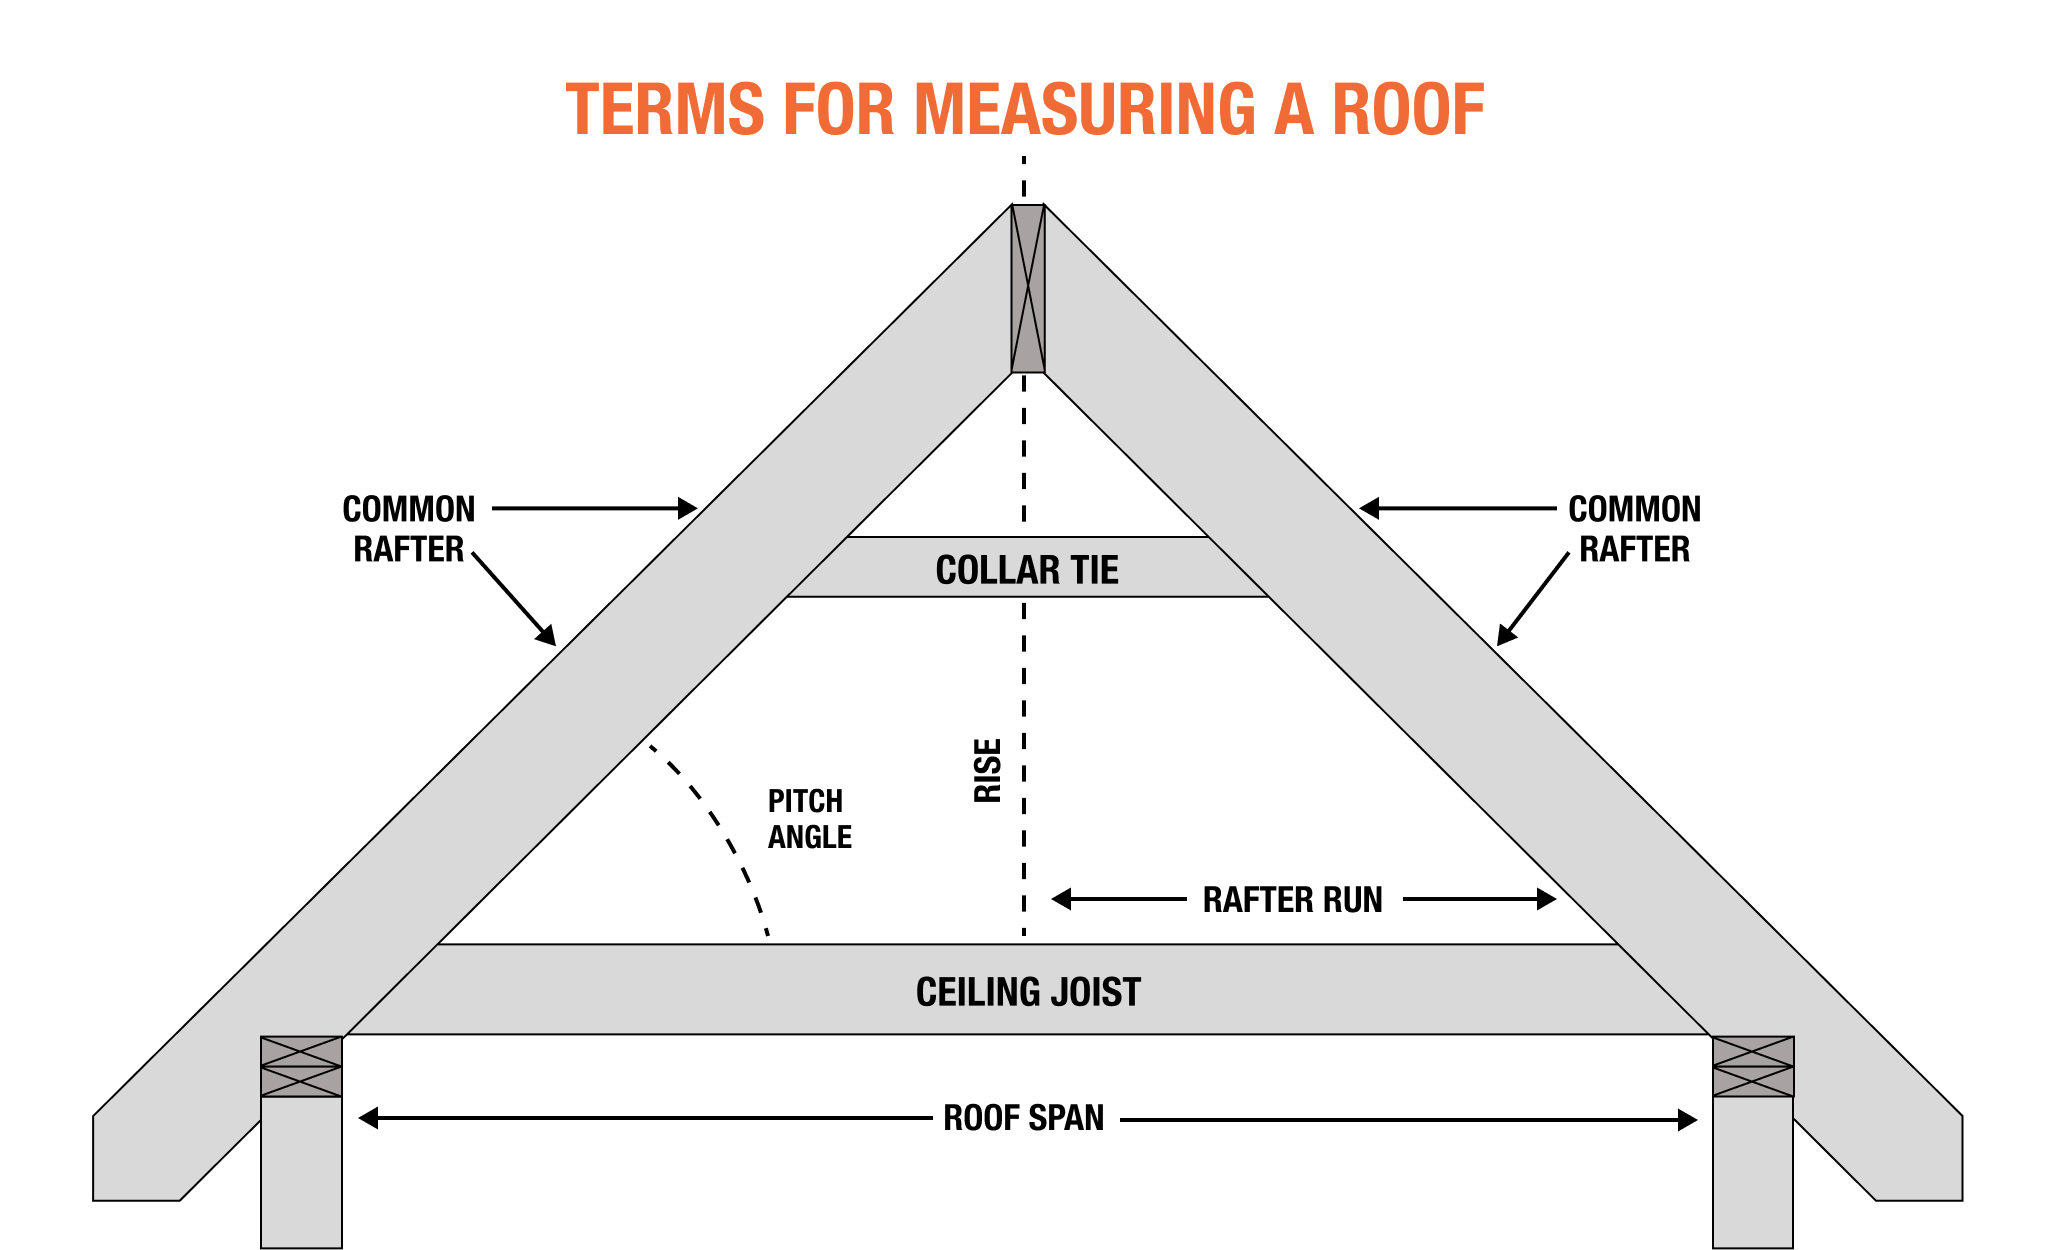 A diagram of terms for measuring a roof.